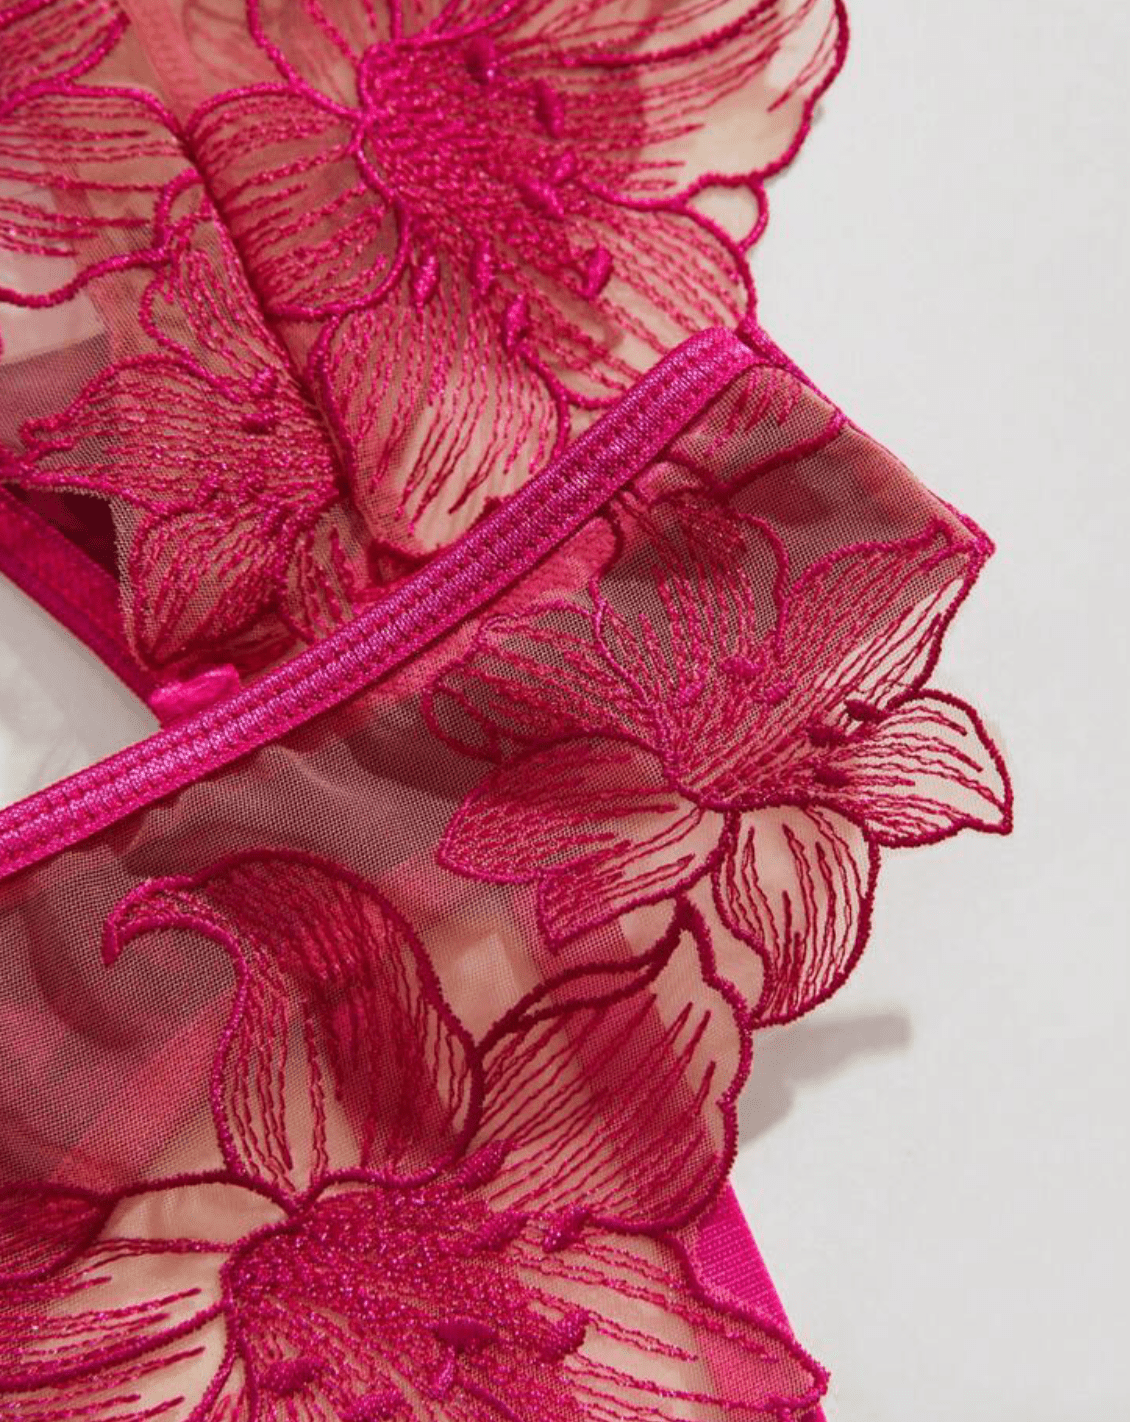 embroidered lingerie floral lace fabric